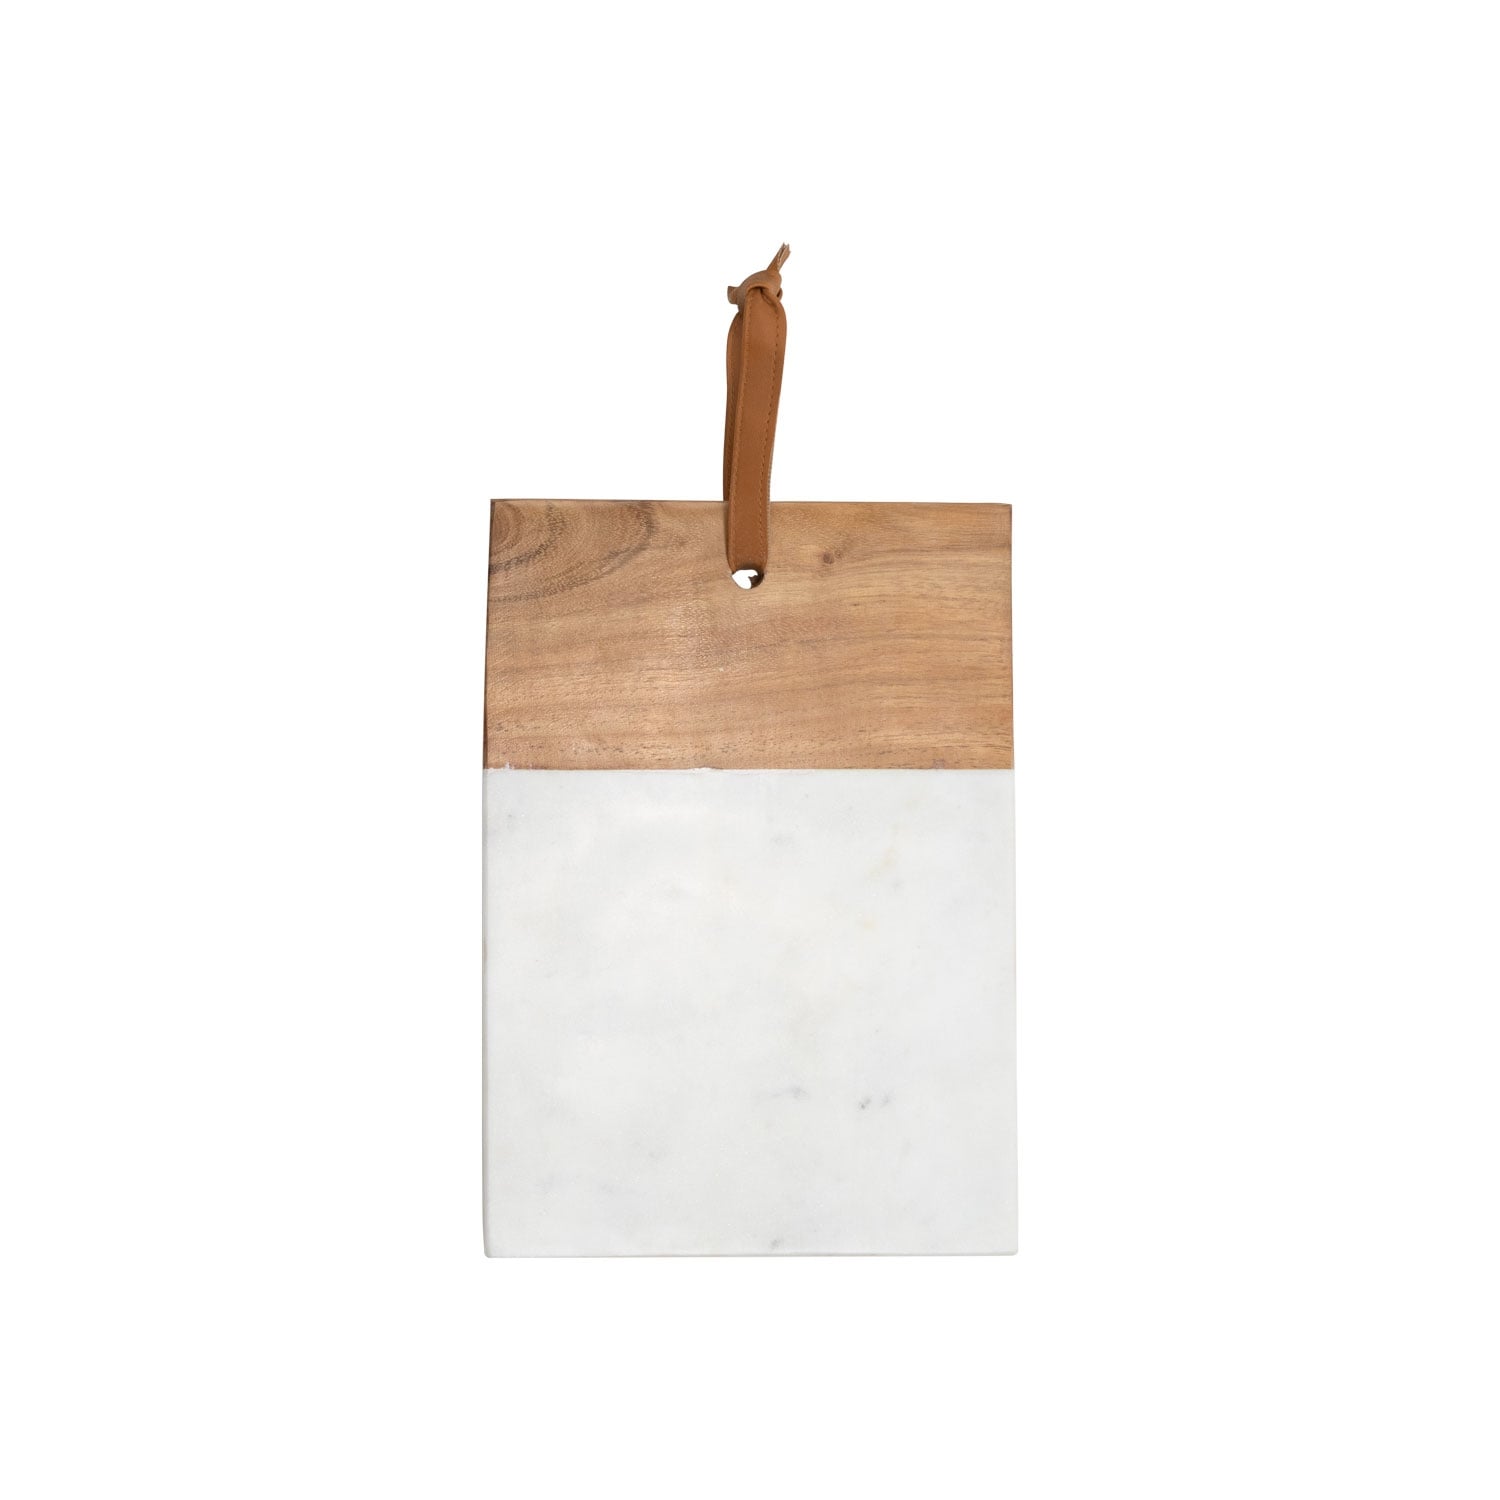 https://ak1.ostkcdn.com/images/products/is/images/direct/abe109bc0c6ed6754c2394649675020defa2979e/Foreside-Home-%26-Garden-Small-Square-White-Marble-and-Wood-Kitchen-Serving-Cutting-Board.jpg